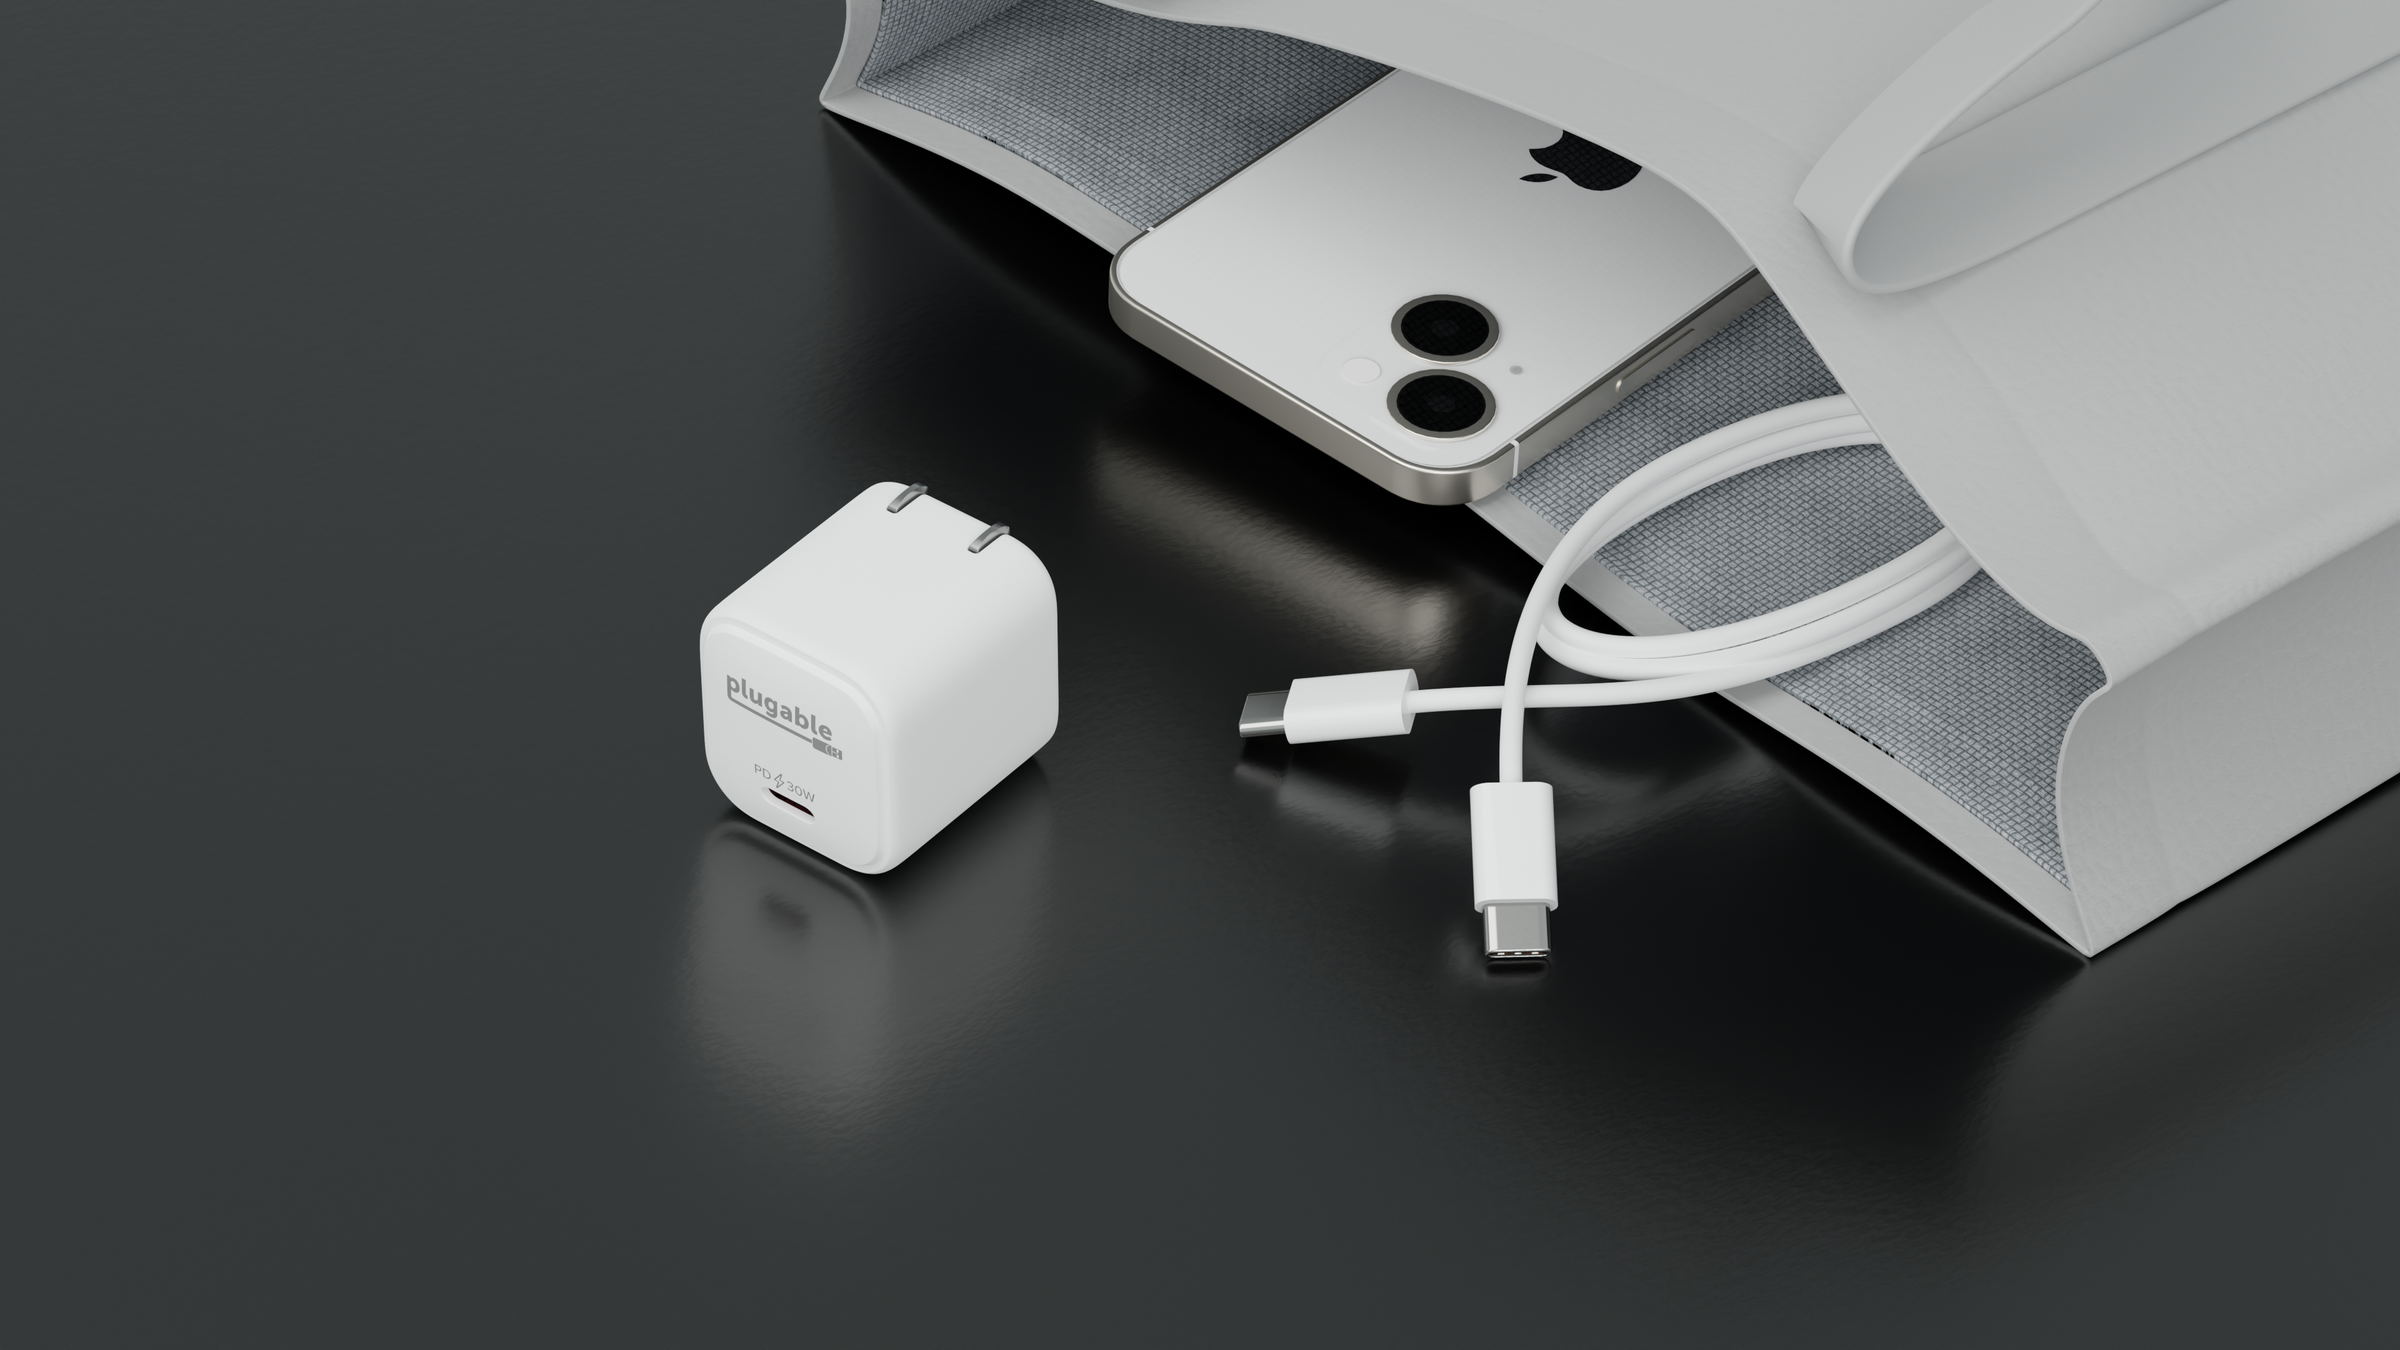 Get the Ultimate PD Fast Charger for iPhone 15 - Order Now!